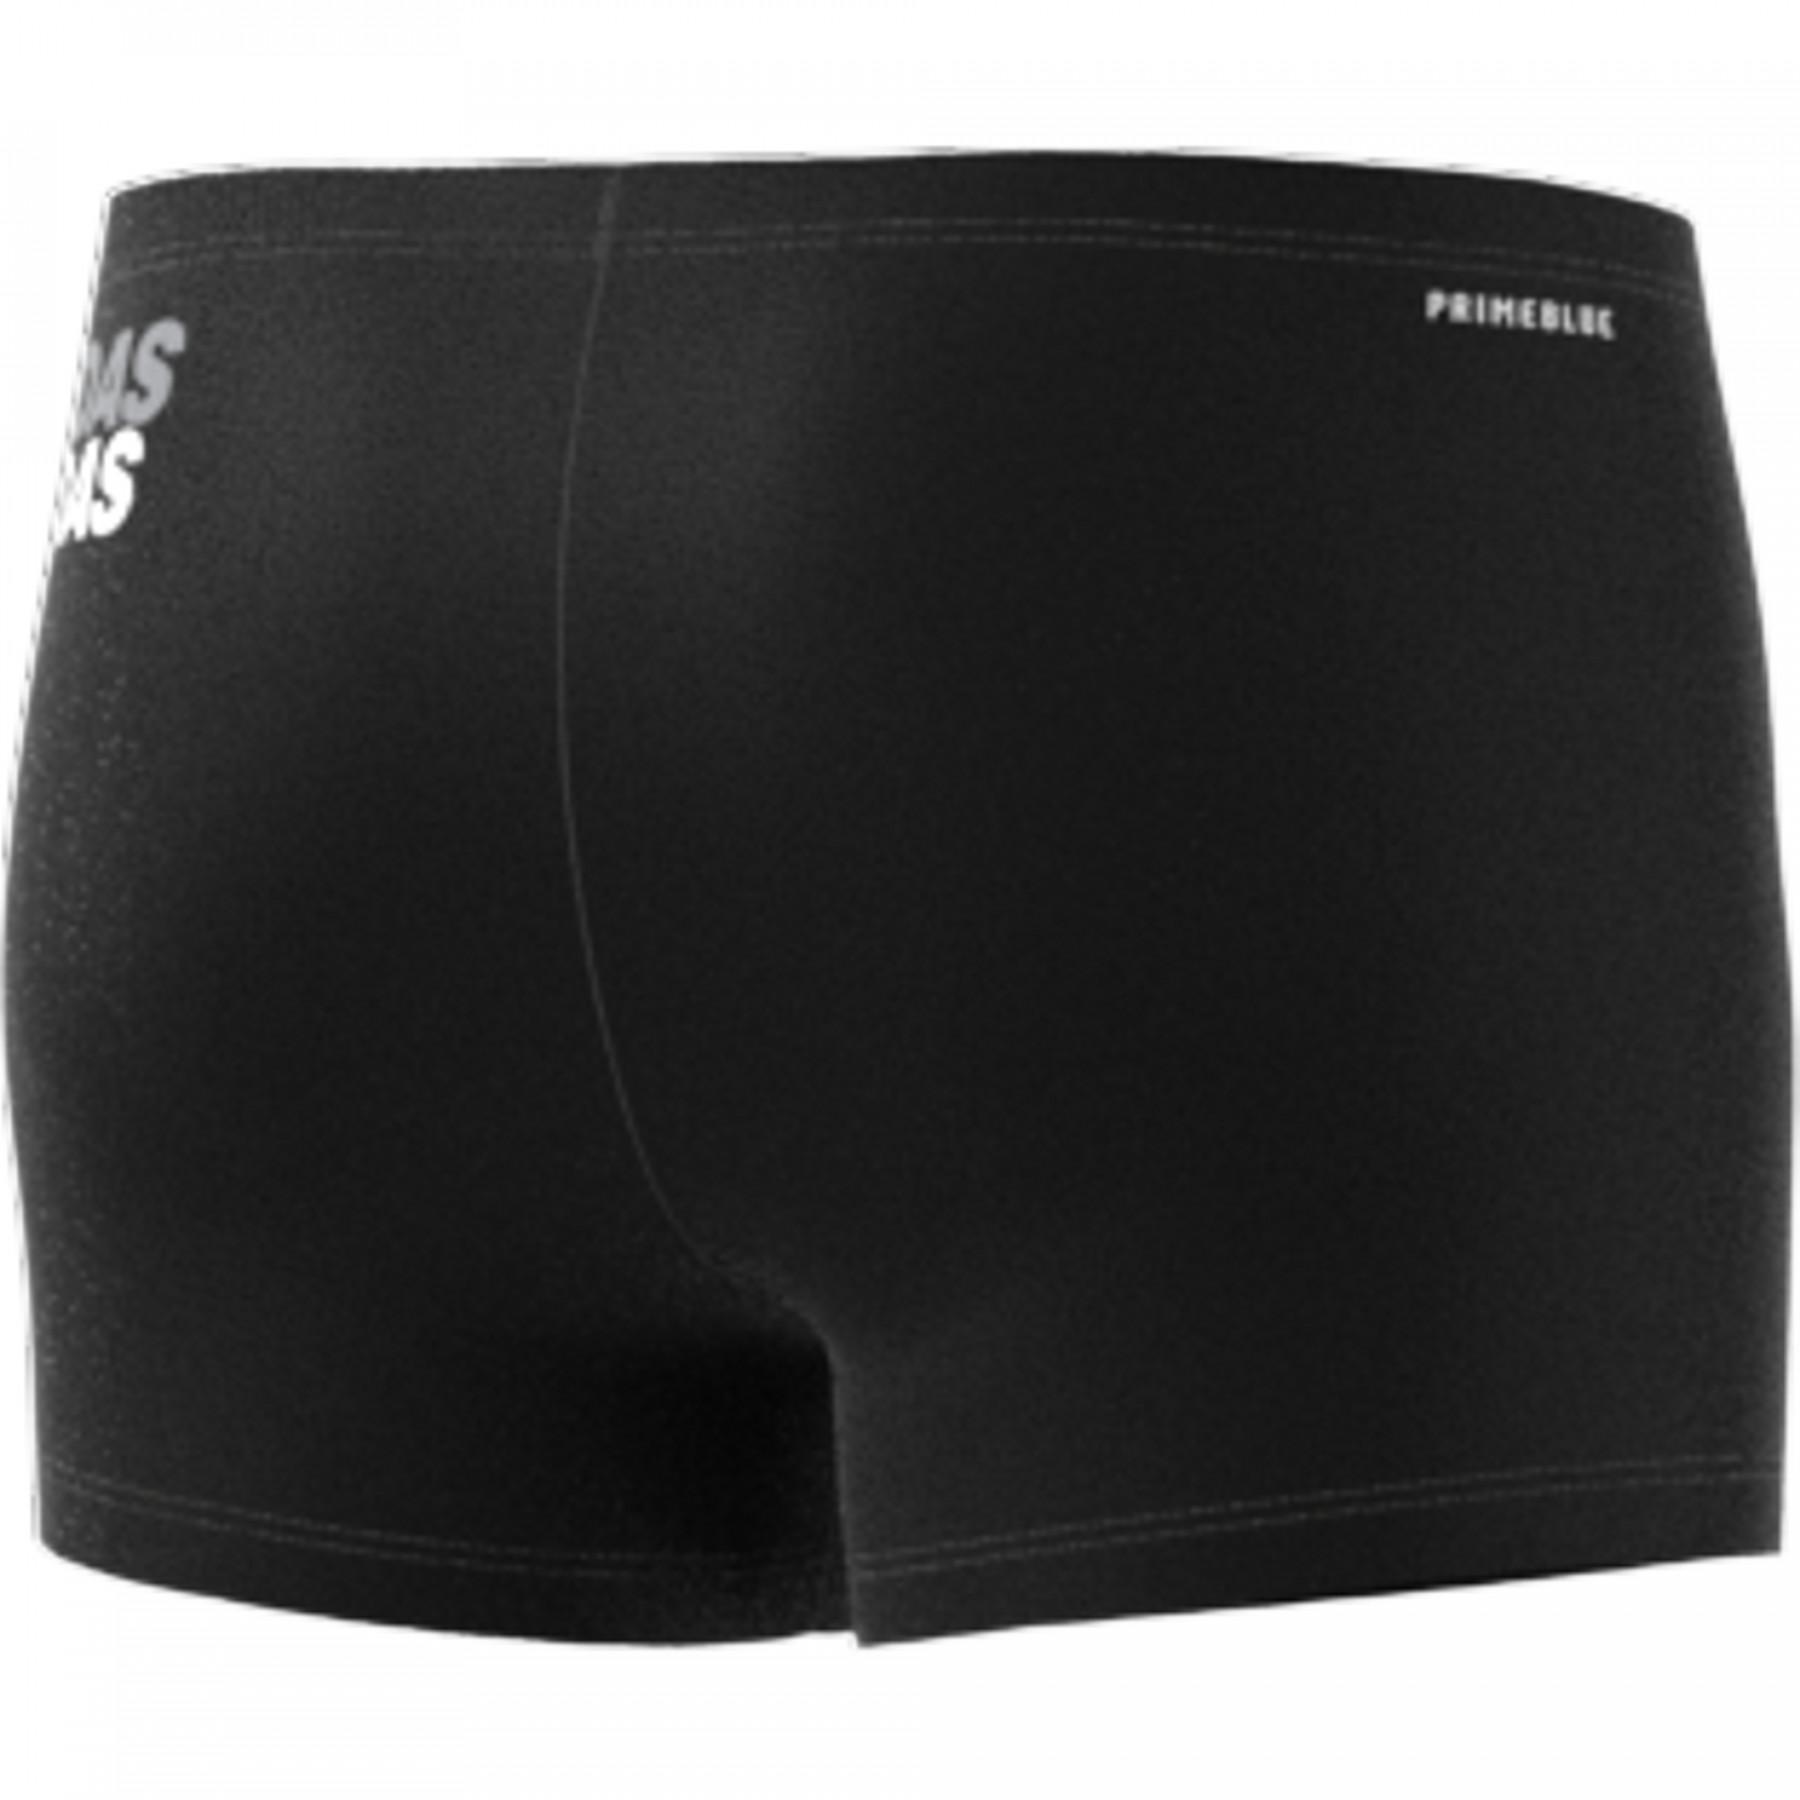 Swimming boxer shorts adidas Lineage